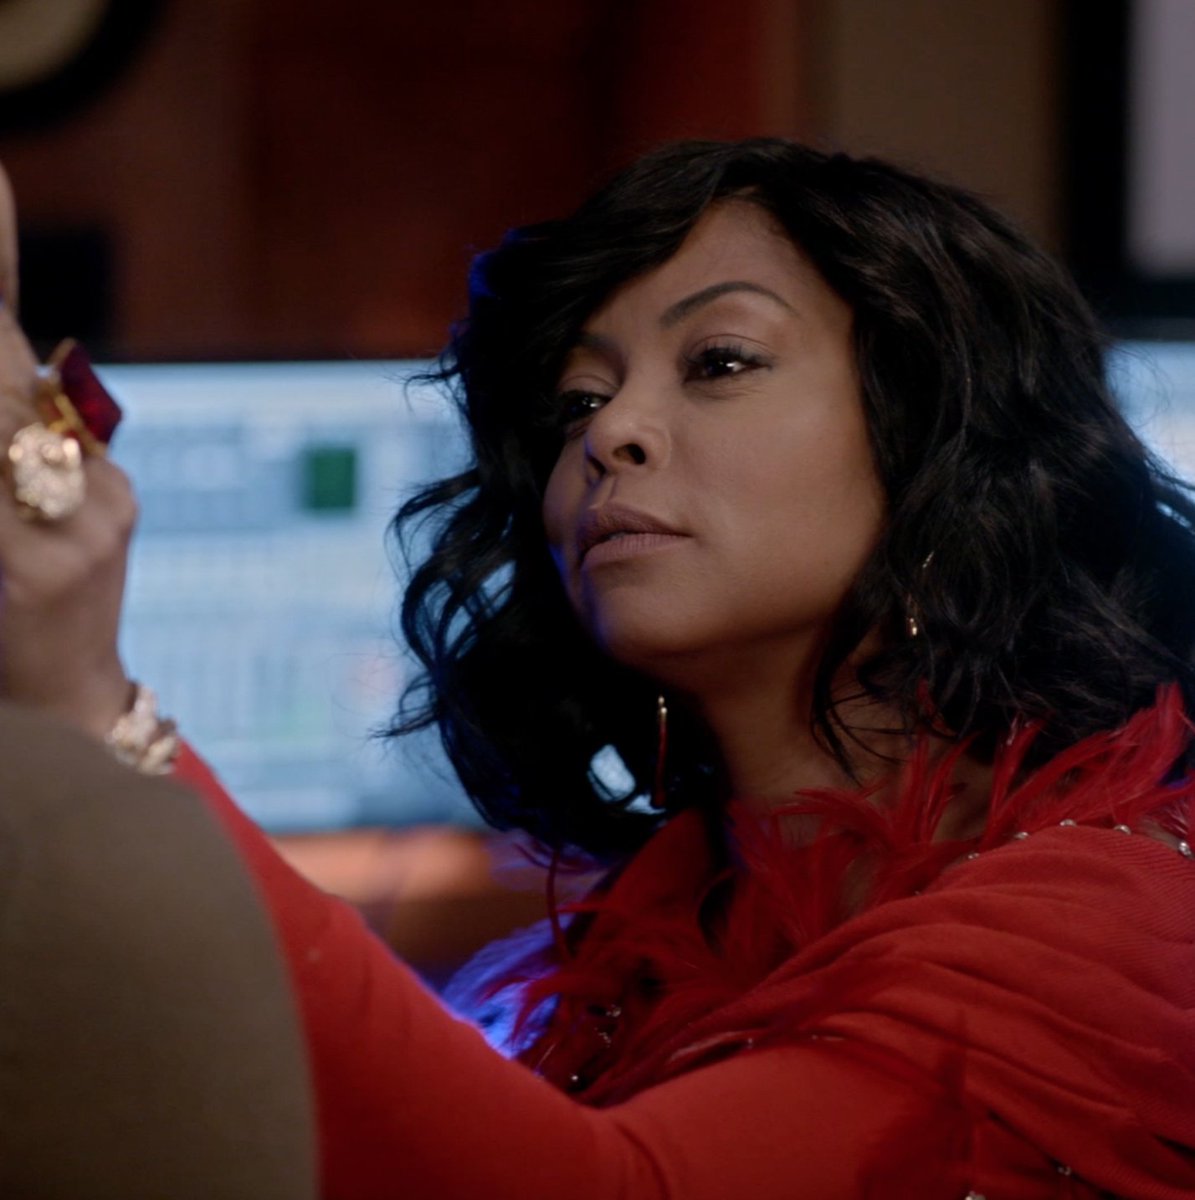 RT @EmpireFOX: RETWEET if you think Cookie is the best mom ever! #Empire #MothersDay https://t.co/iyfue5g41O